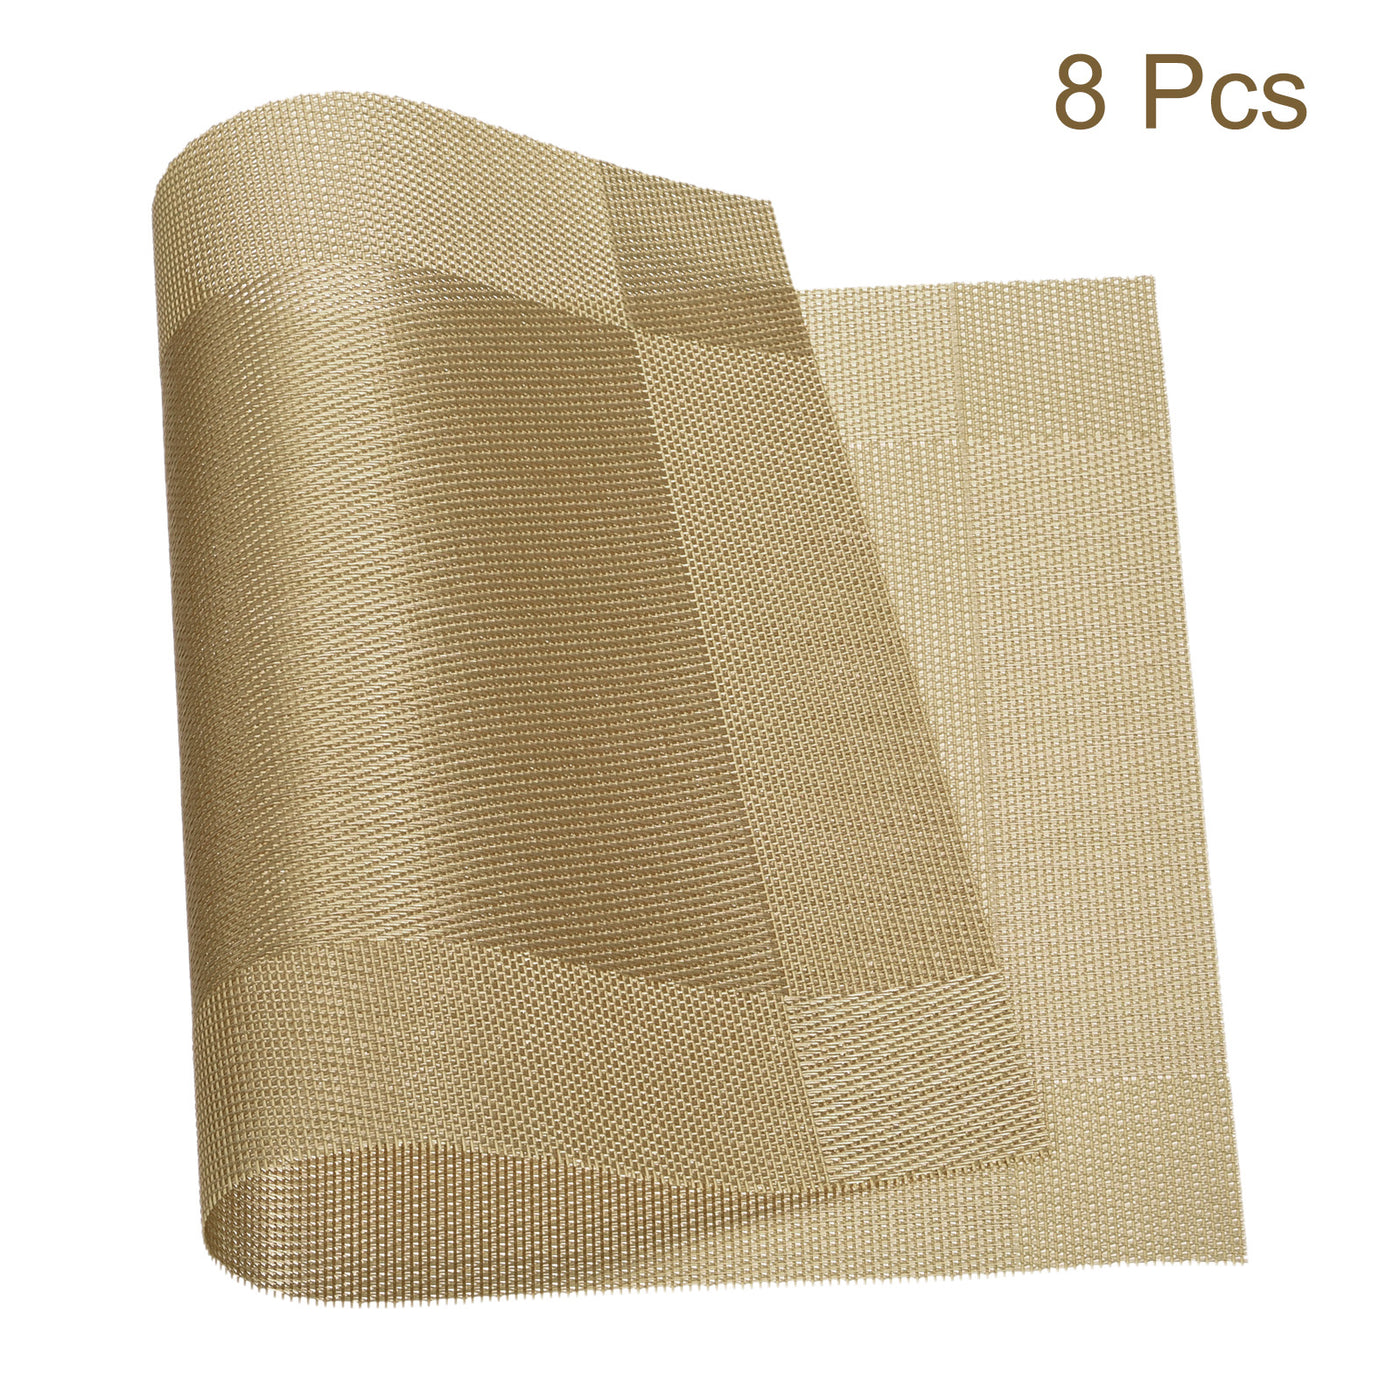 uxcell Uxcell Place Mats 450x300mm 8pcs PVC Table Washable Woven Placemat, Golden